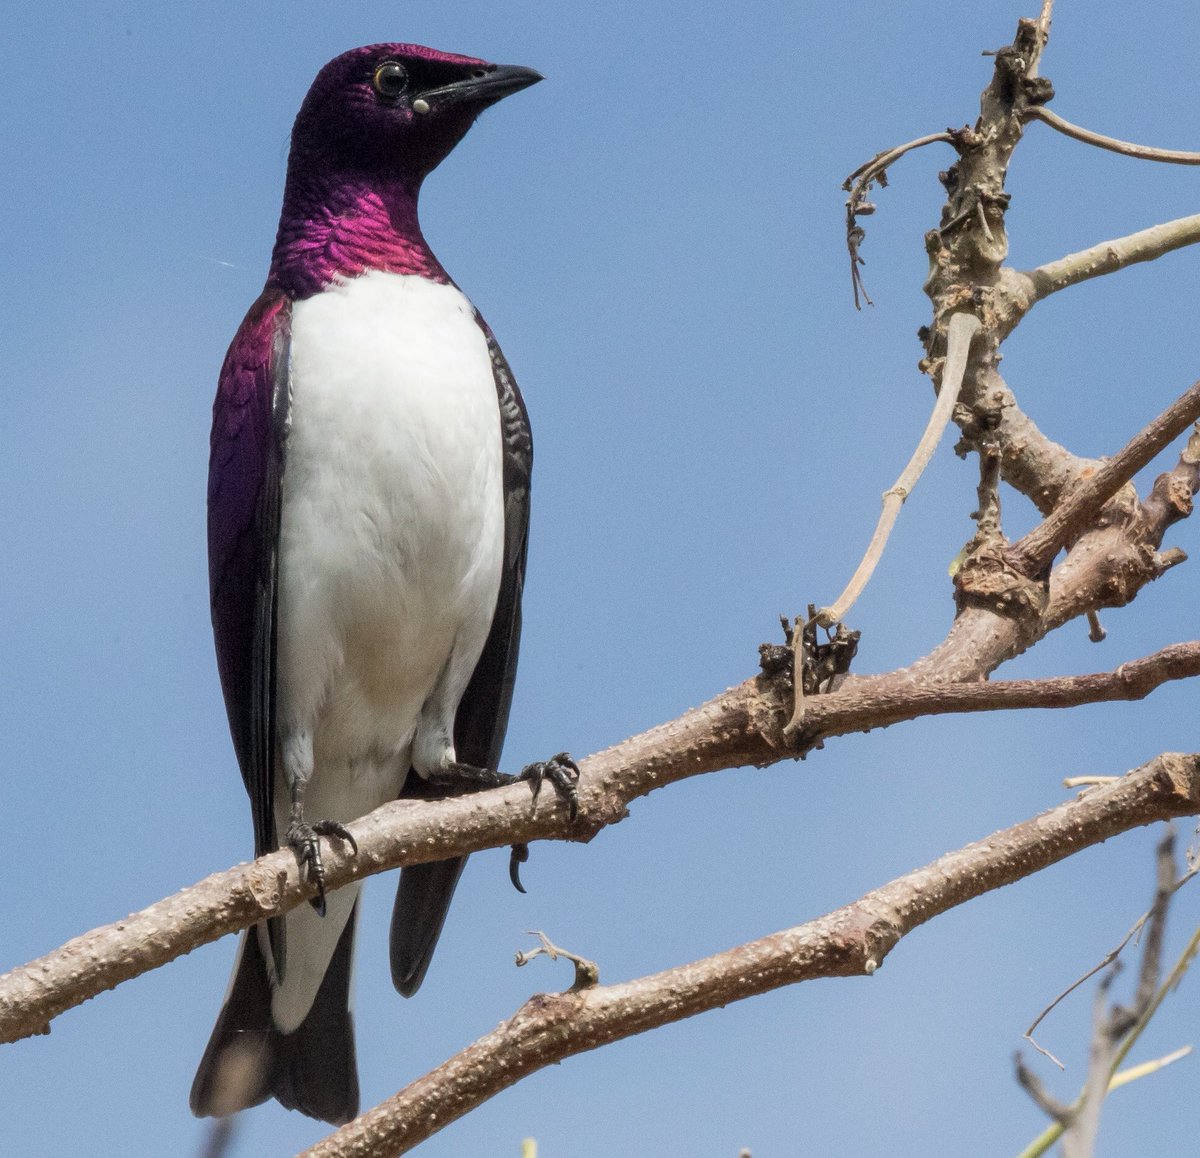 The Violet backed starling is a stunning member of the family whose male is angel white below and deep purple above. Coming back to #rwanda after many years it was wonderful to see hundreds of them swarm on the trees at #akageranationalpark #IndiAves #dailybirdpix